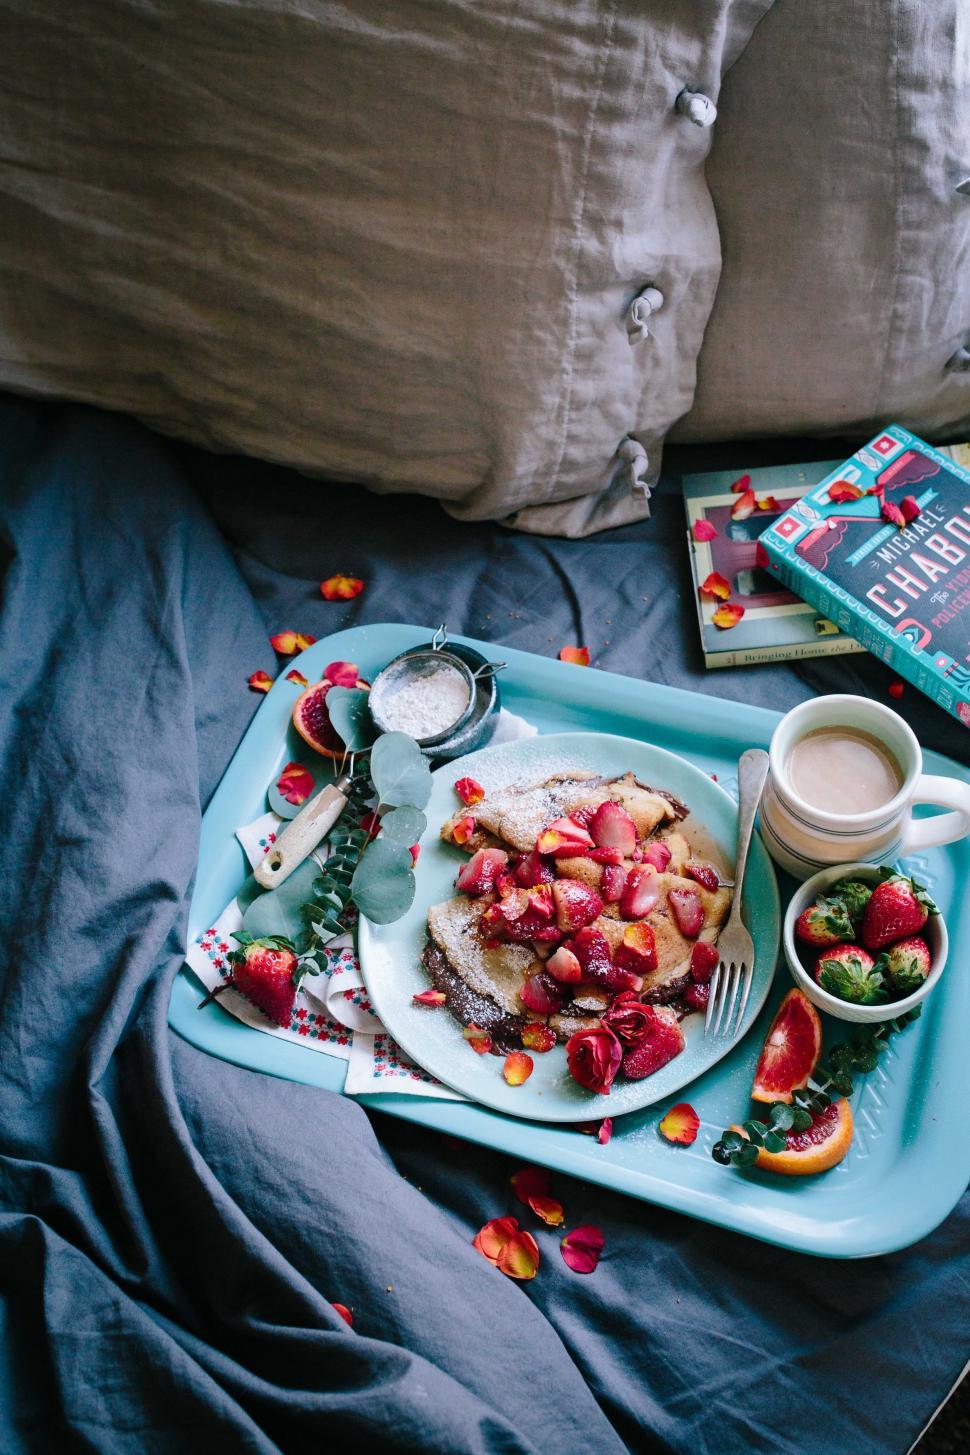 Free Image of Plate of Food and Cup of Coffee on Bed 